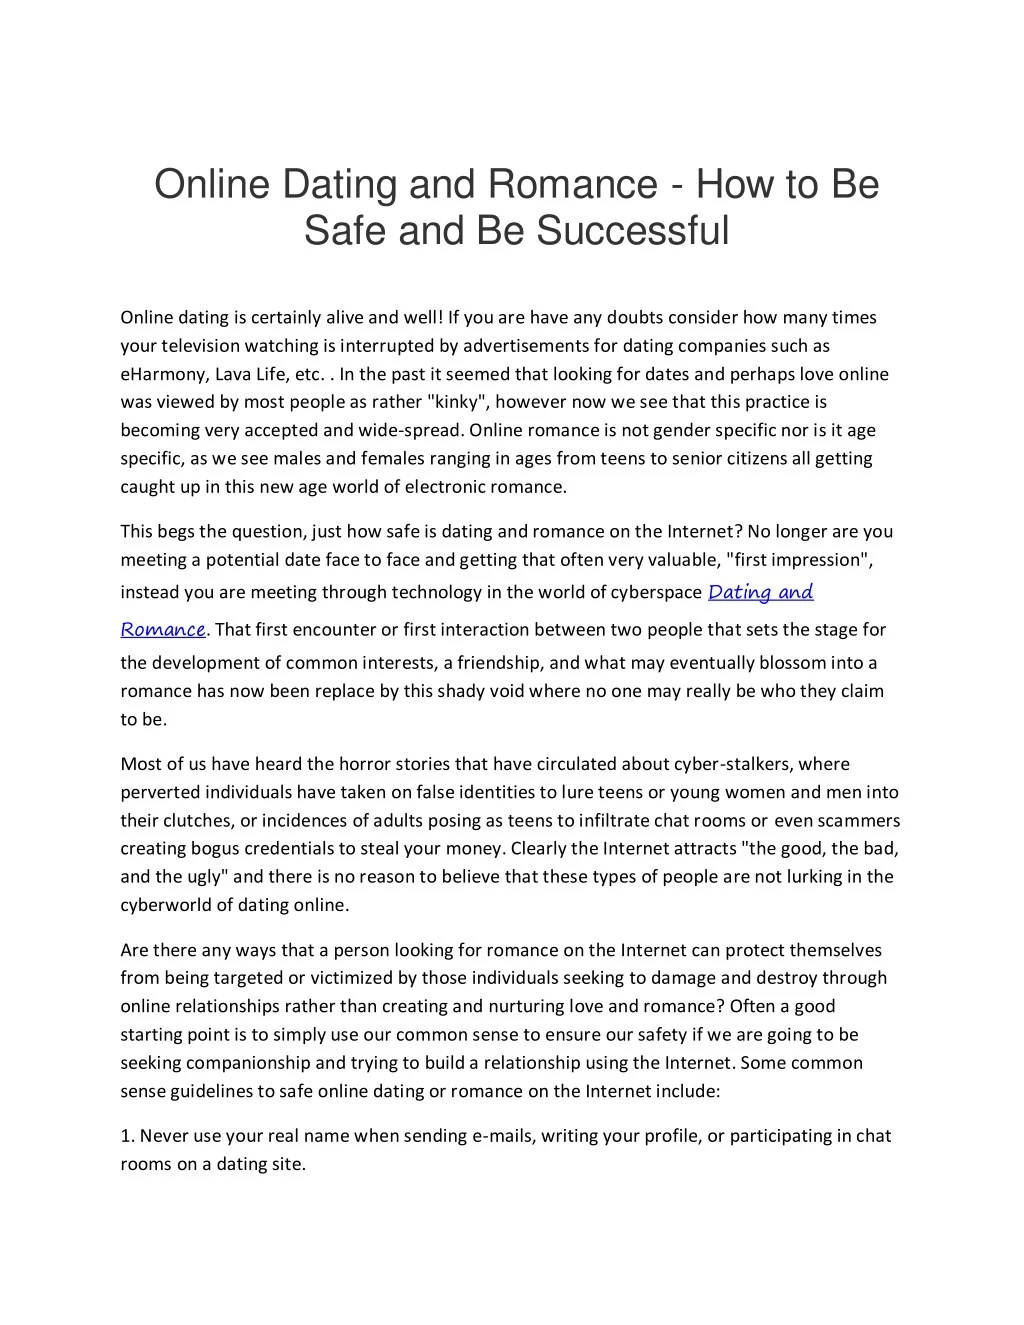 online dating and romance how to be safe